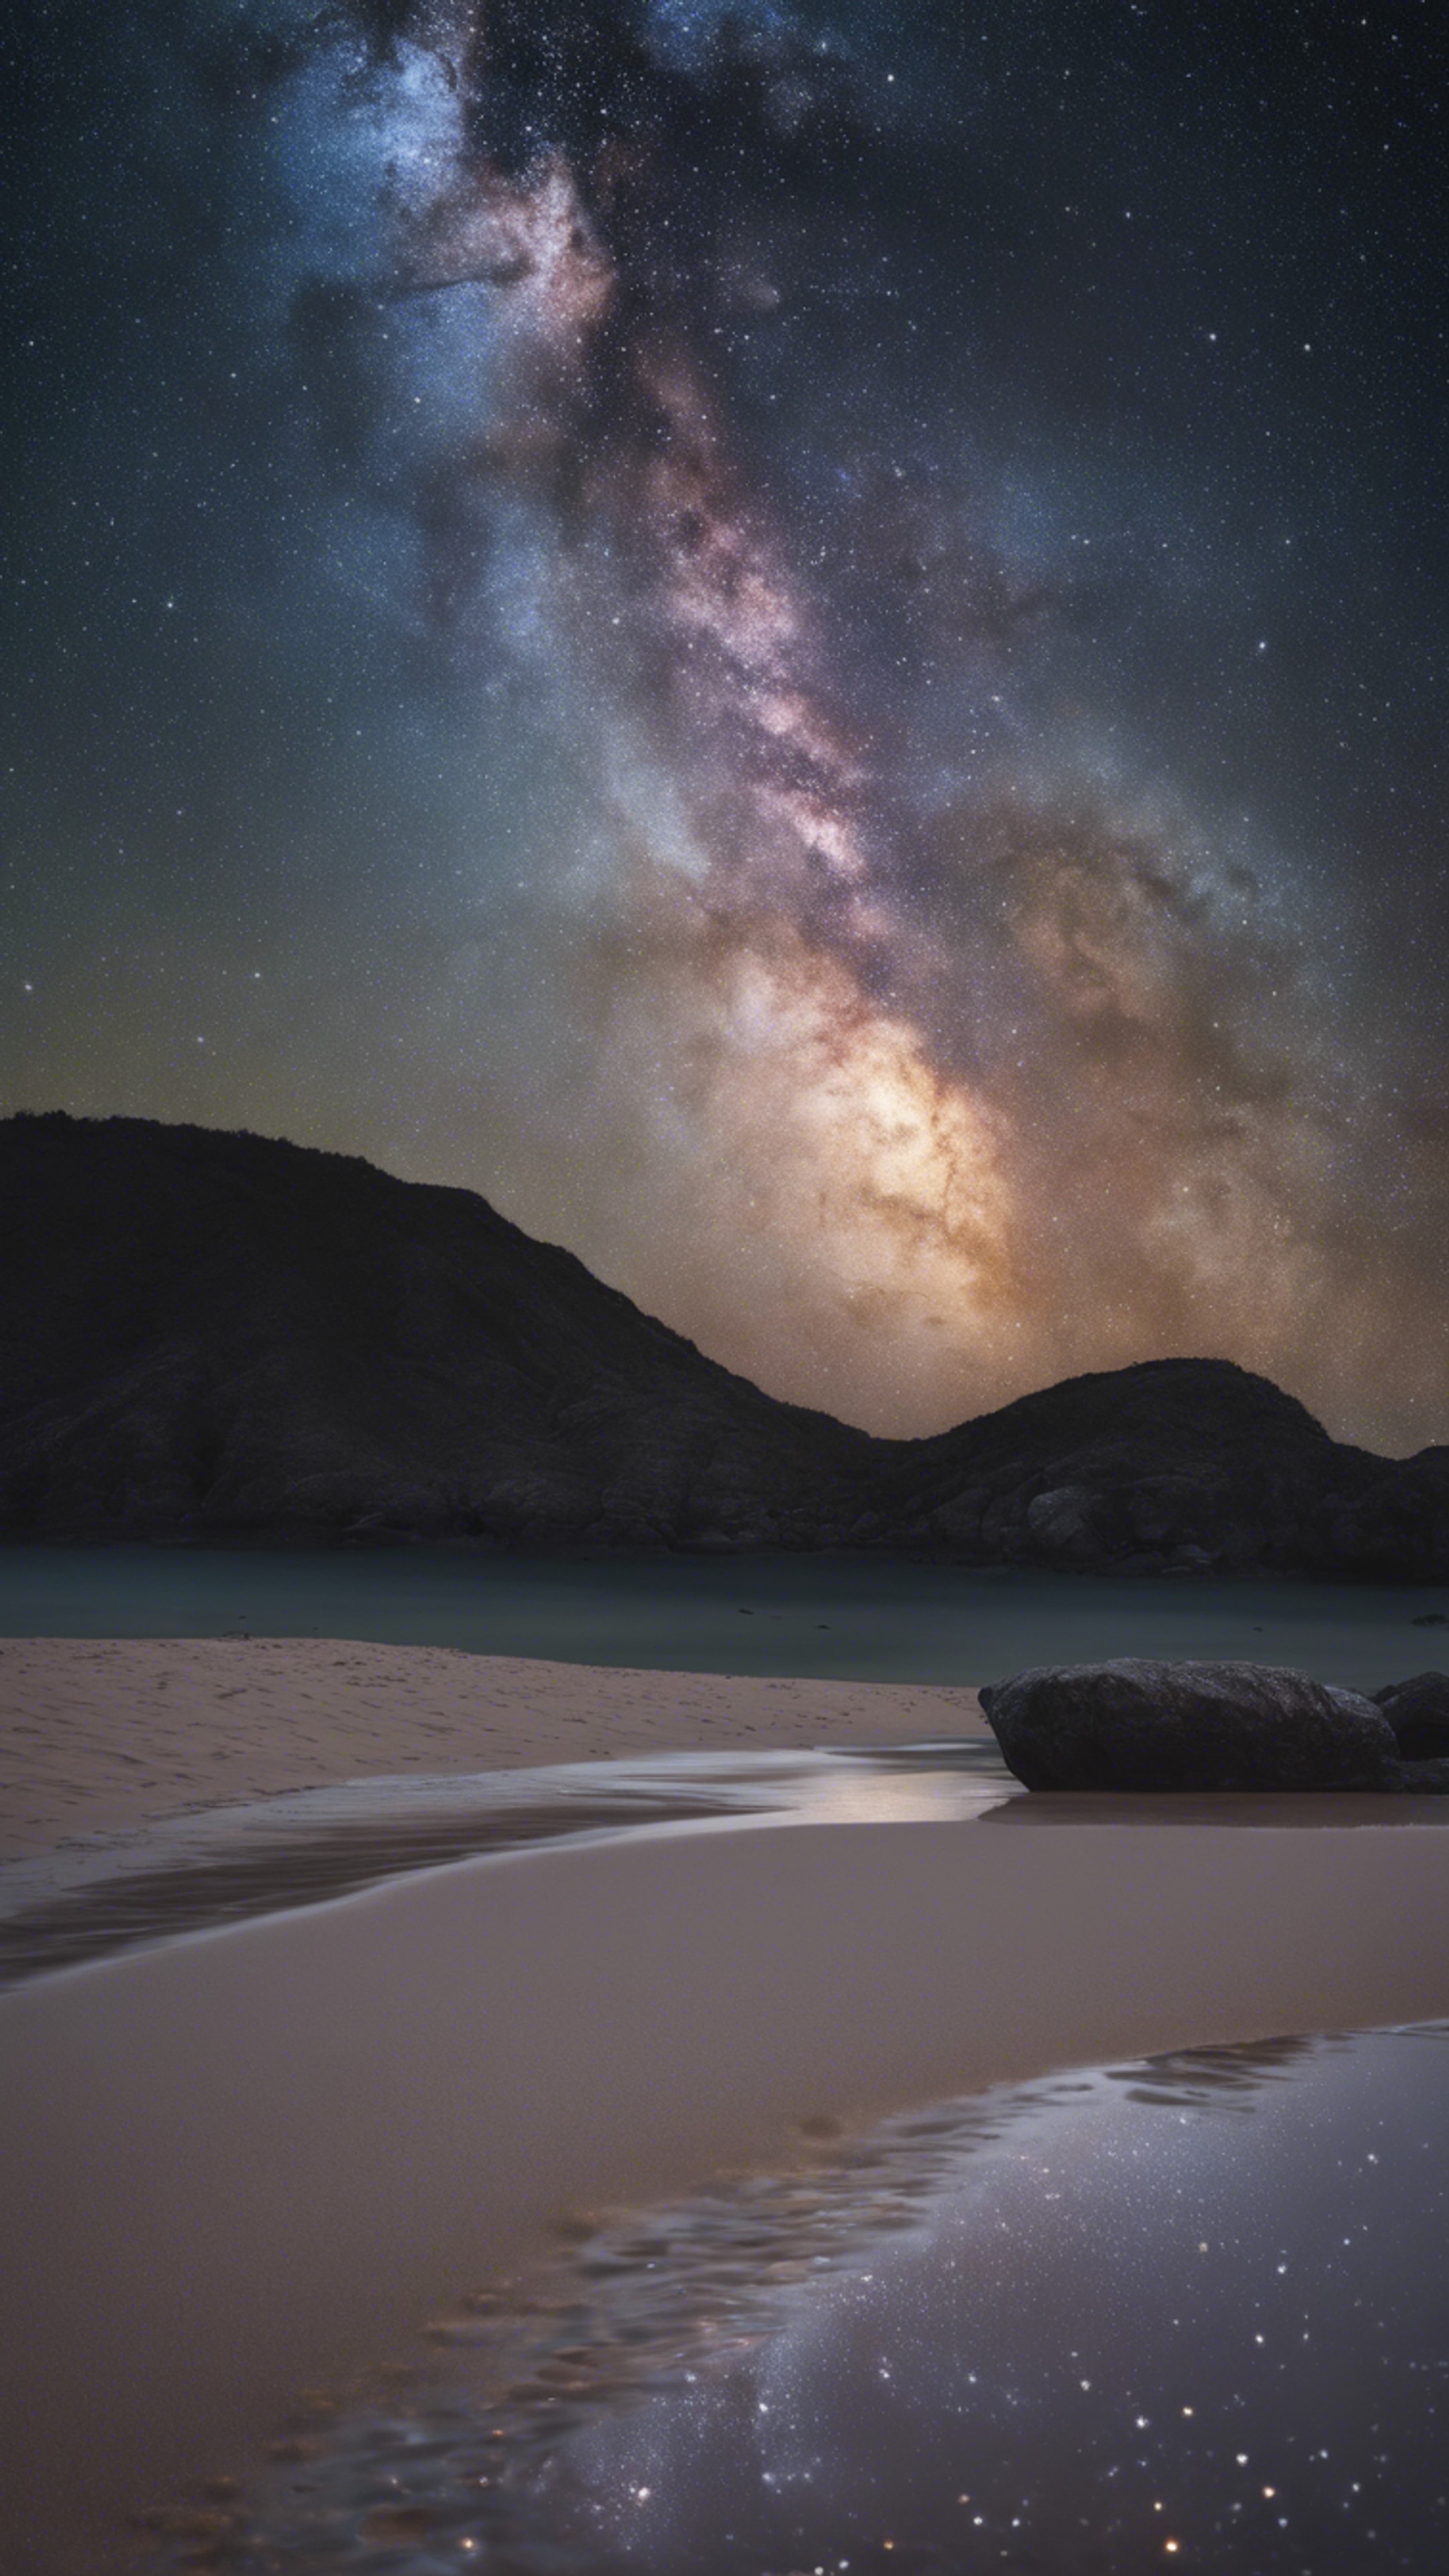 View of the Milky Way Galaxy across a dark starry night sky as seen from a deserted beach.壁紙[ccd5588141b94e439f84]